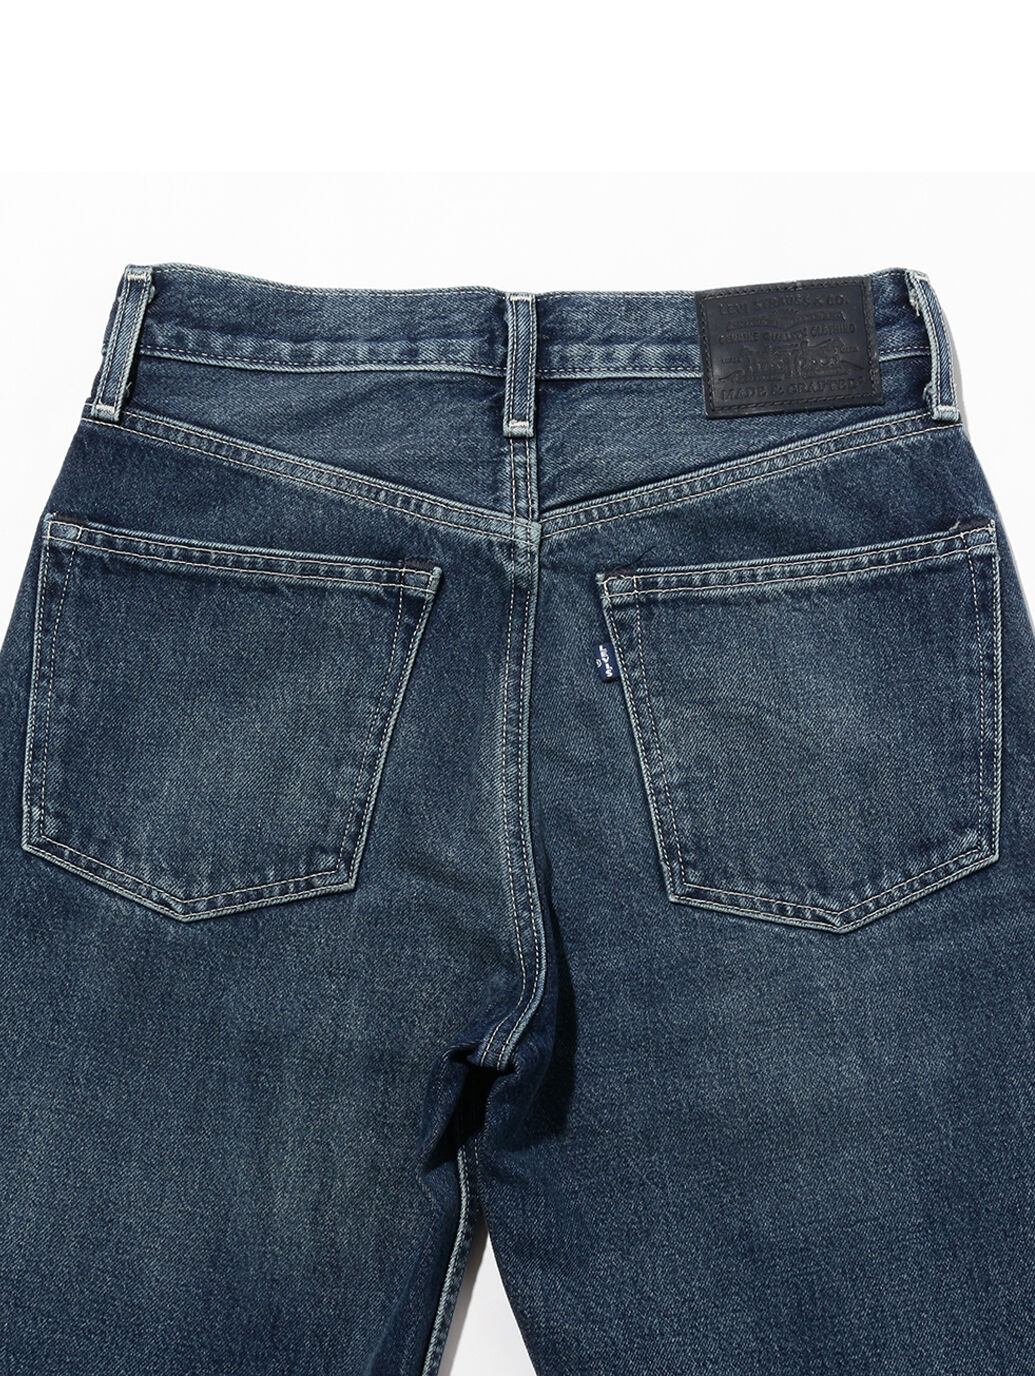 LEVI'S® MADE&CRAFTED®THE COLUMN WATERLOG｜リーバイス® 公式通販